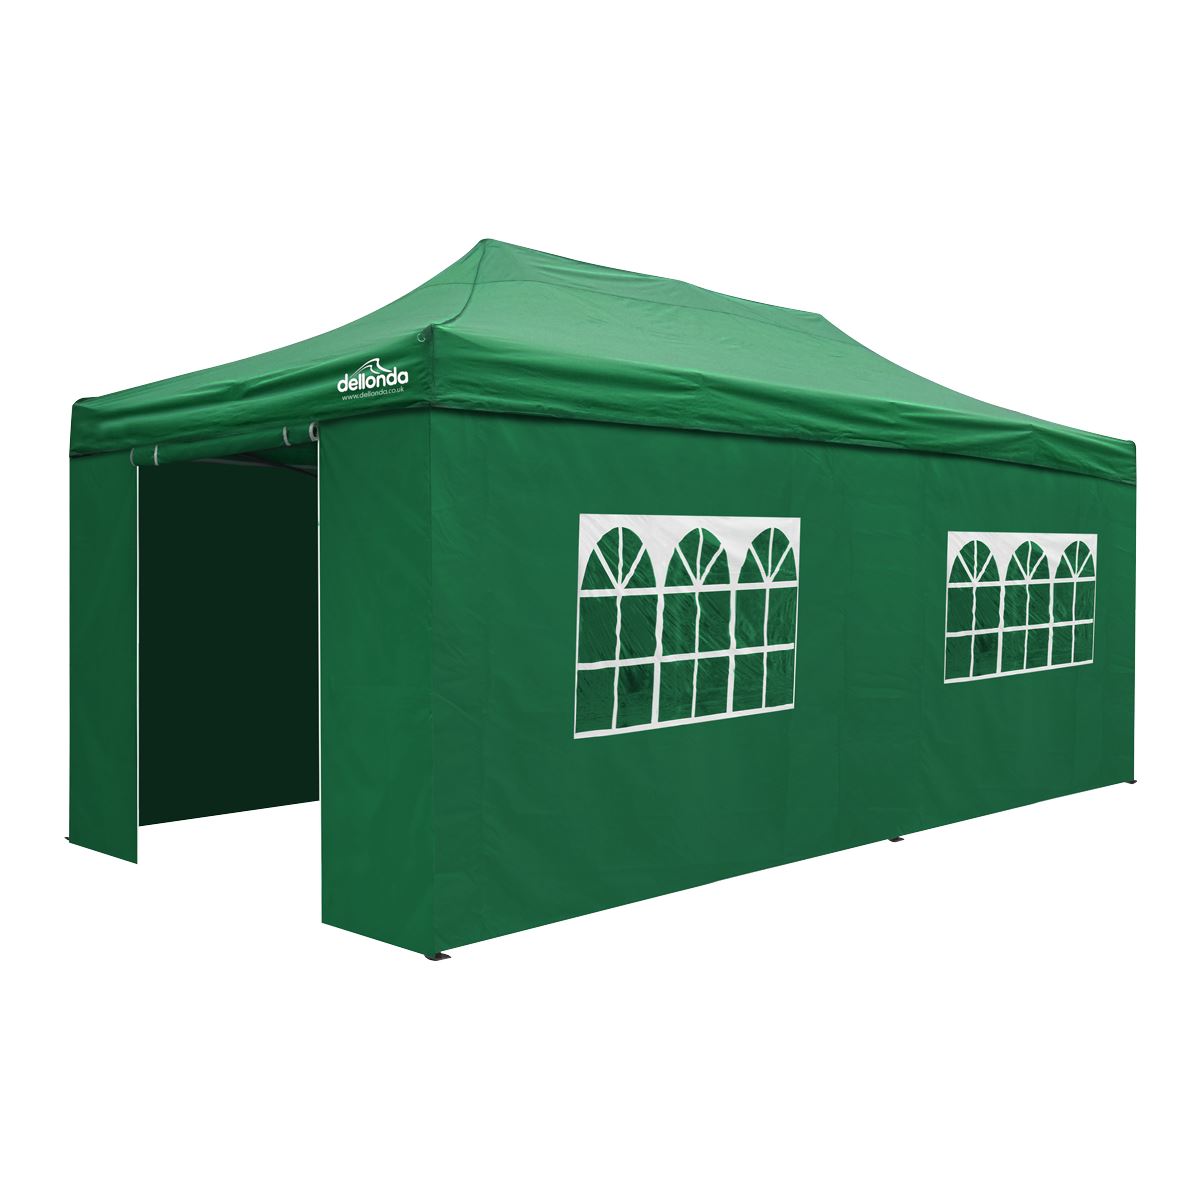 Dellonda Premium 3x6m Pop-Up Gazebo & Side Walls, PVC Coated, Water Resistant Fabric with Carry Bag, Rope, Stakes & Weight Bags - Green